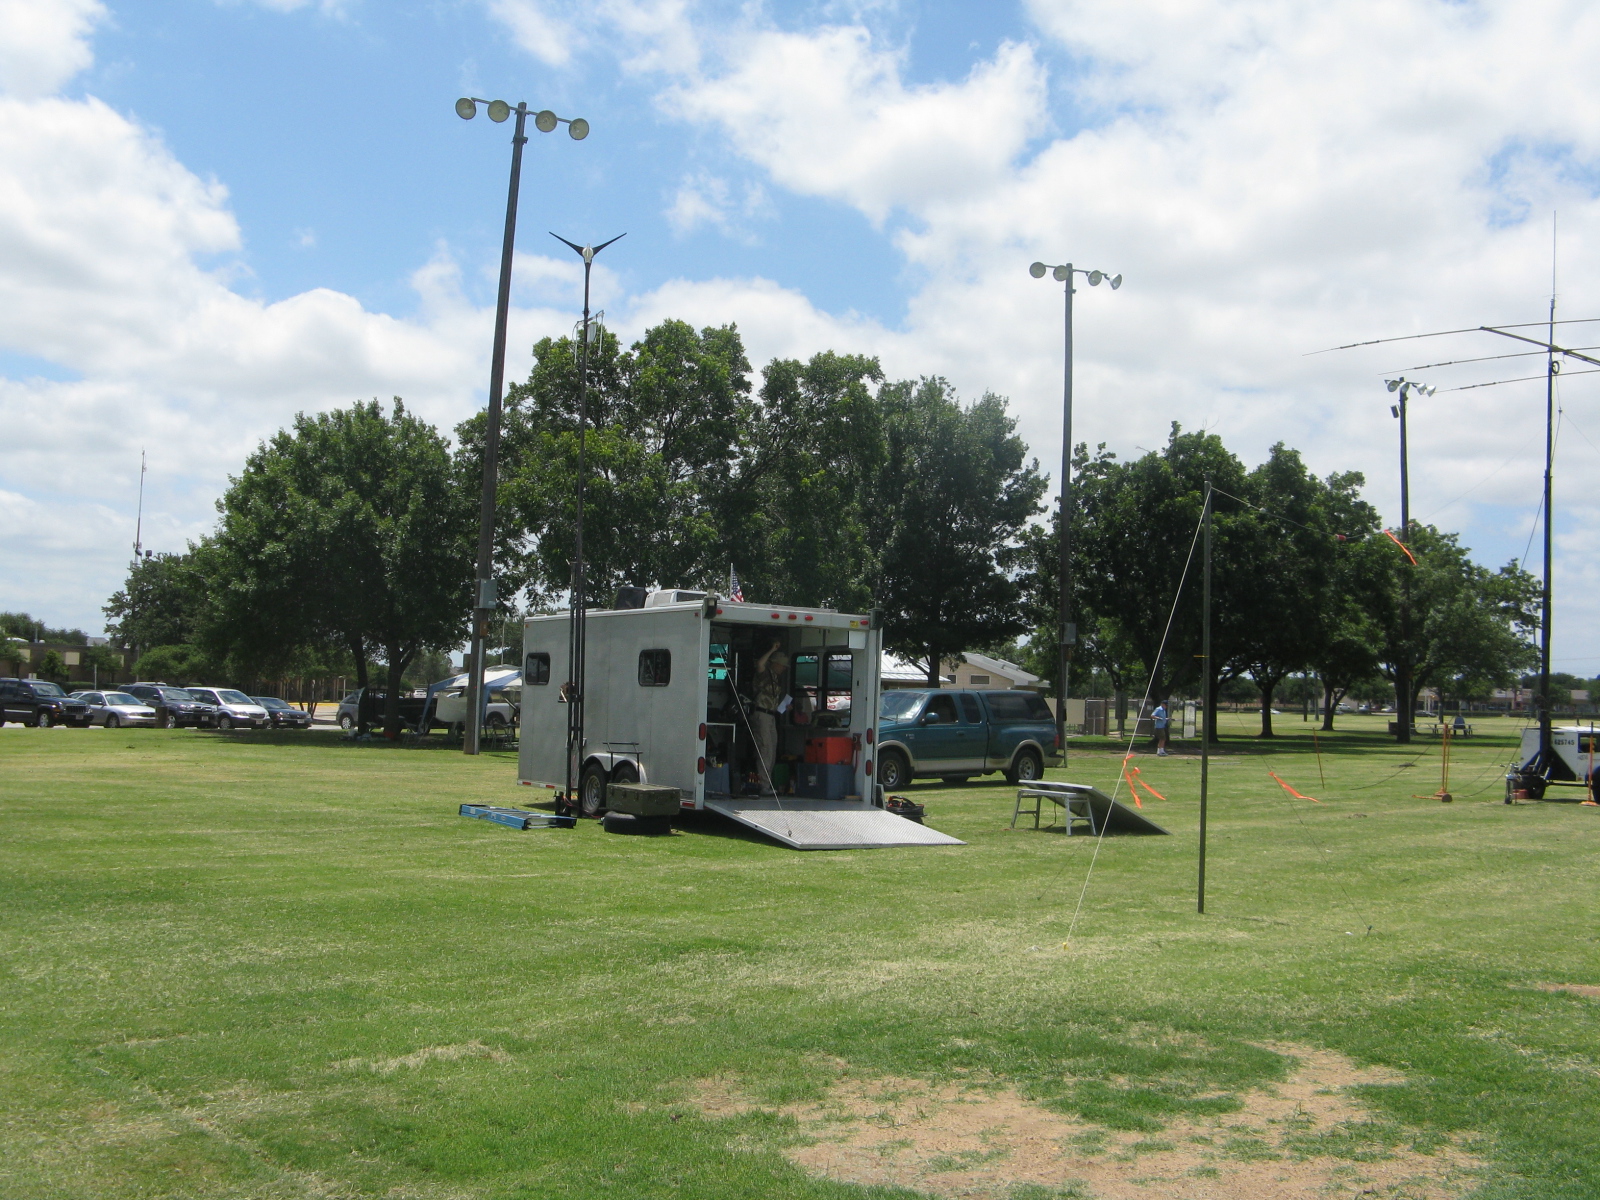 Communications Trailer with Wind Turbine and Solar Panels